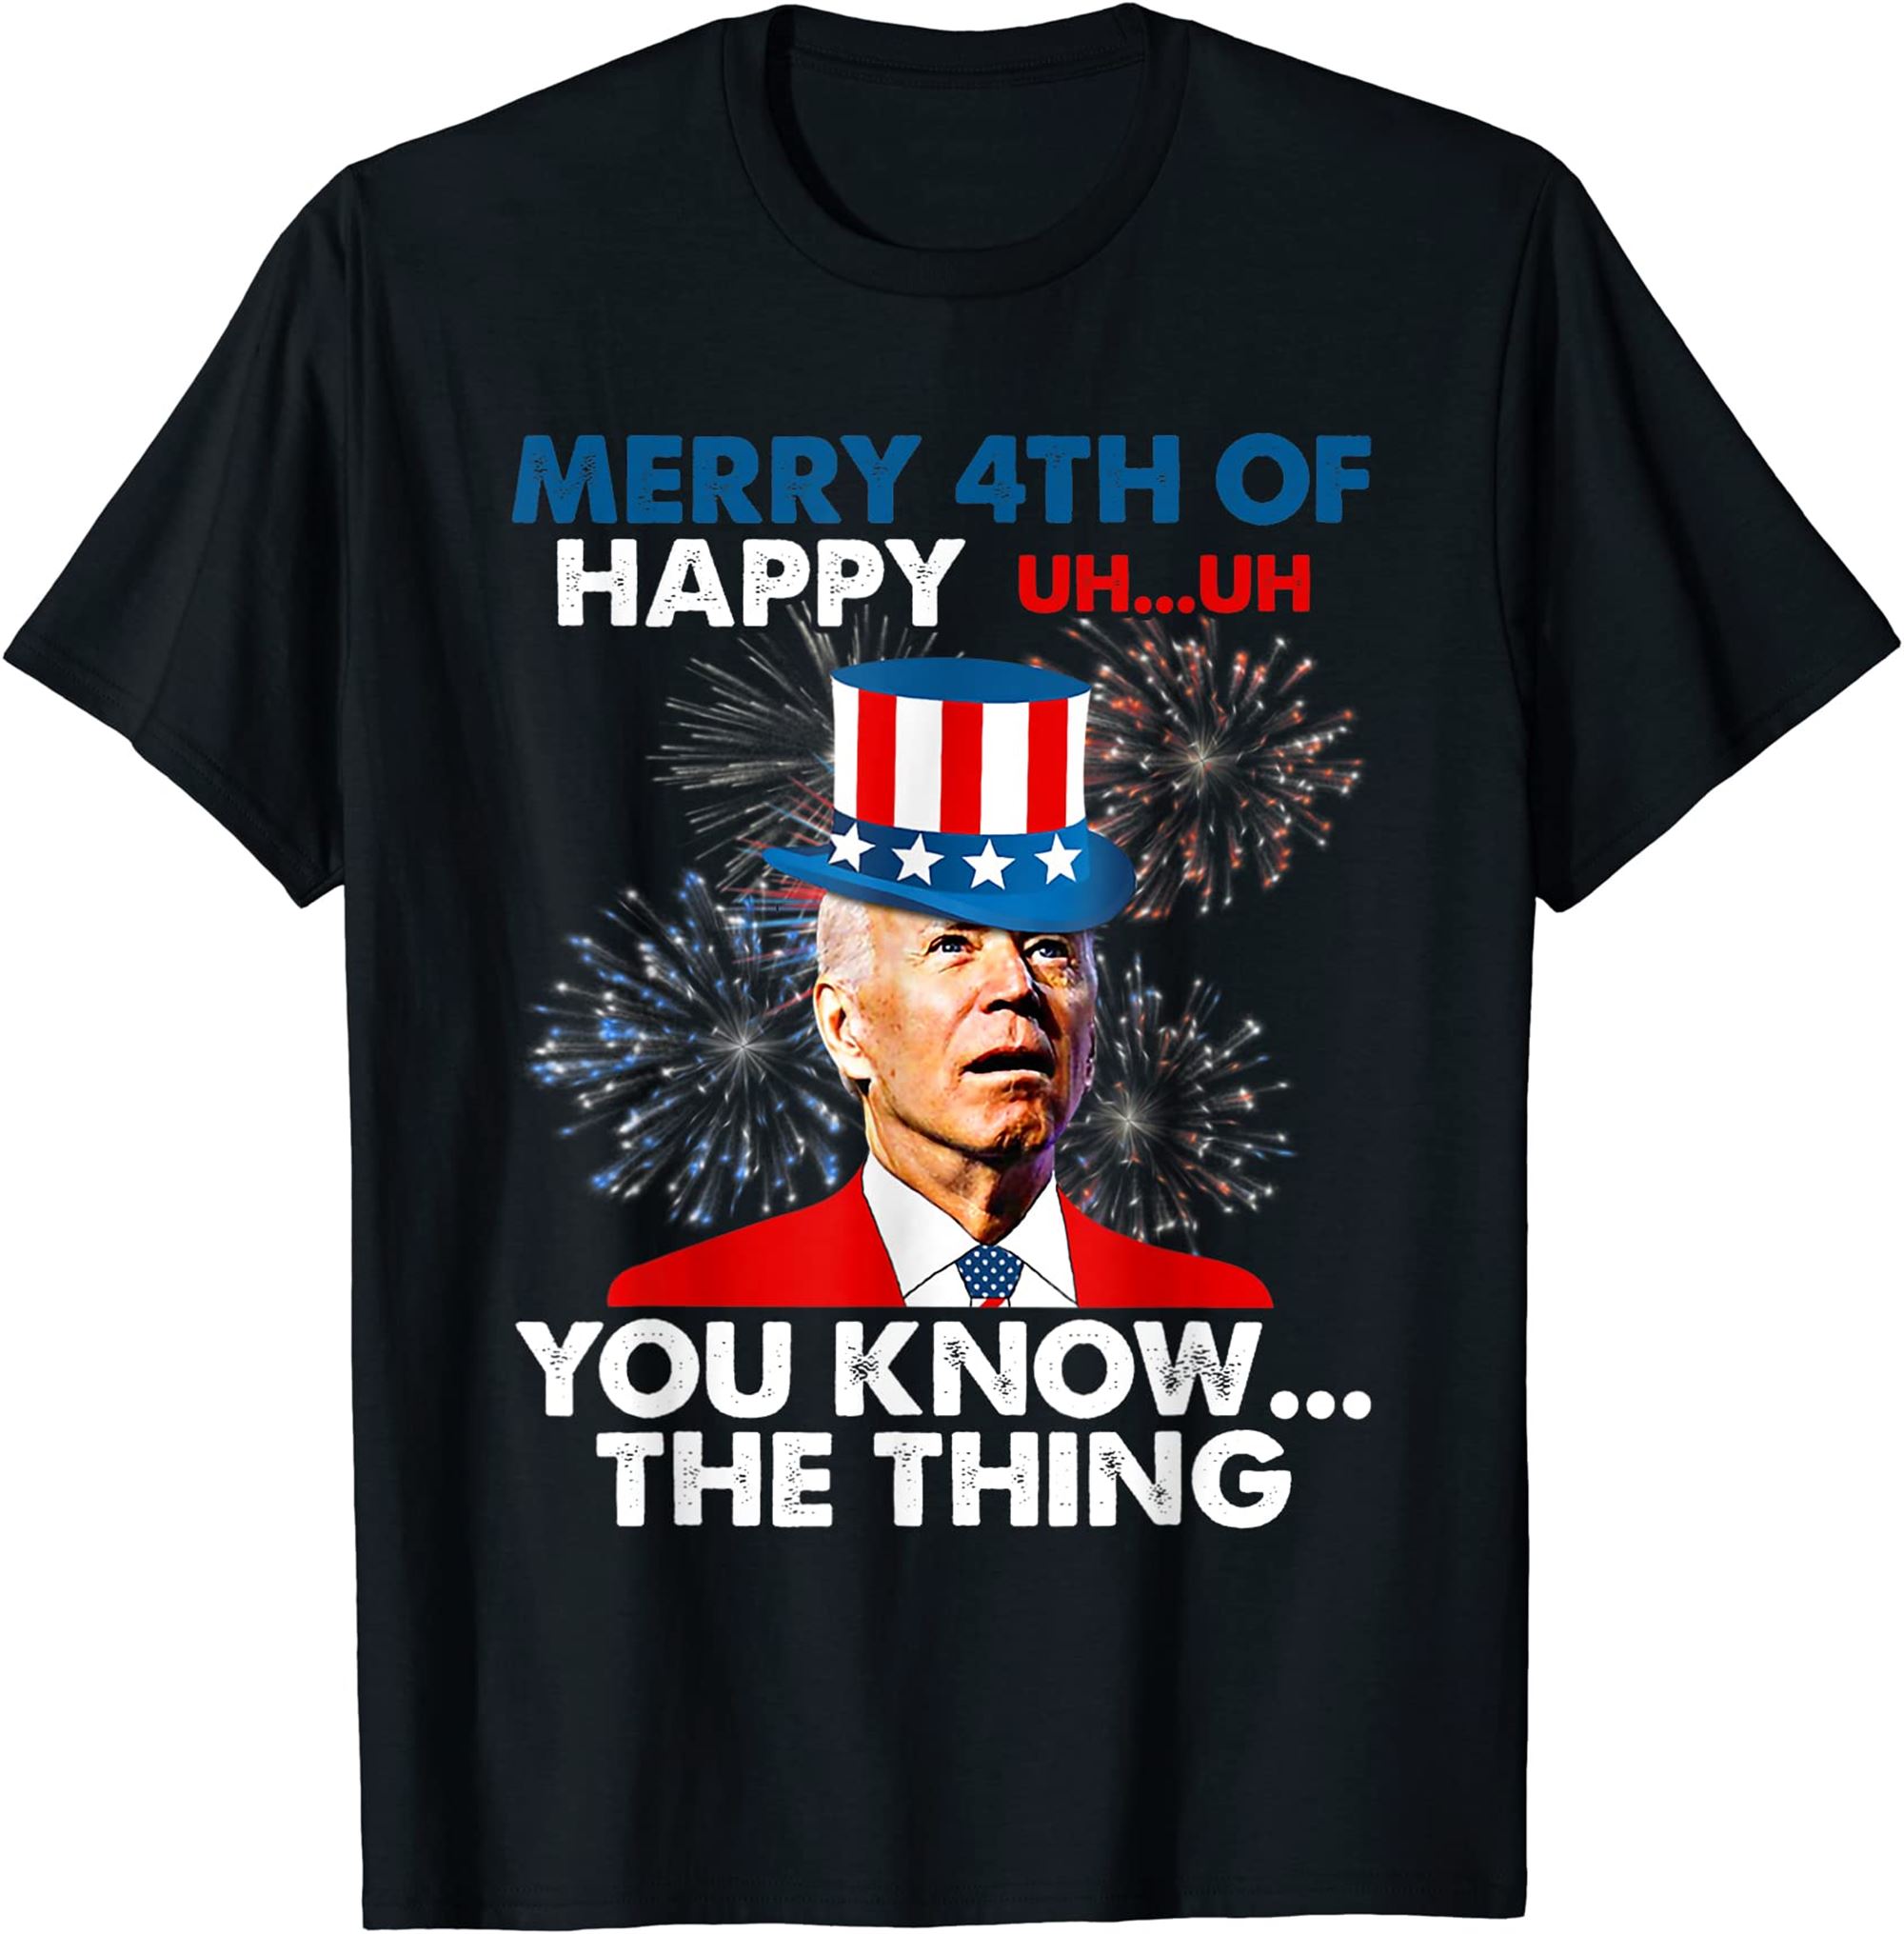 Funny Joe Biden Merry 4th Of You Knowthe Thing 4th Of July T-shirt Size Up To 5xl